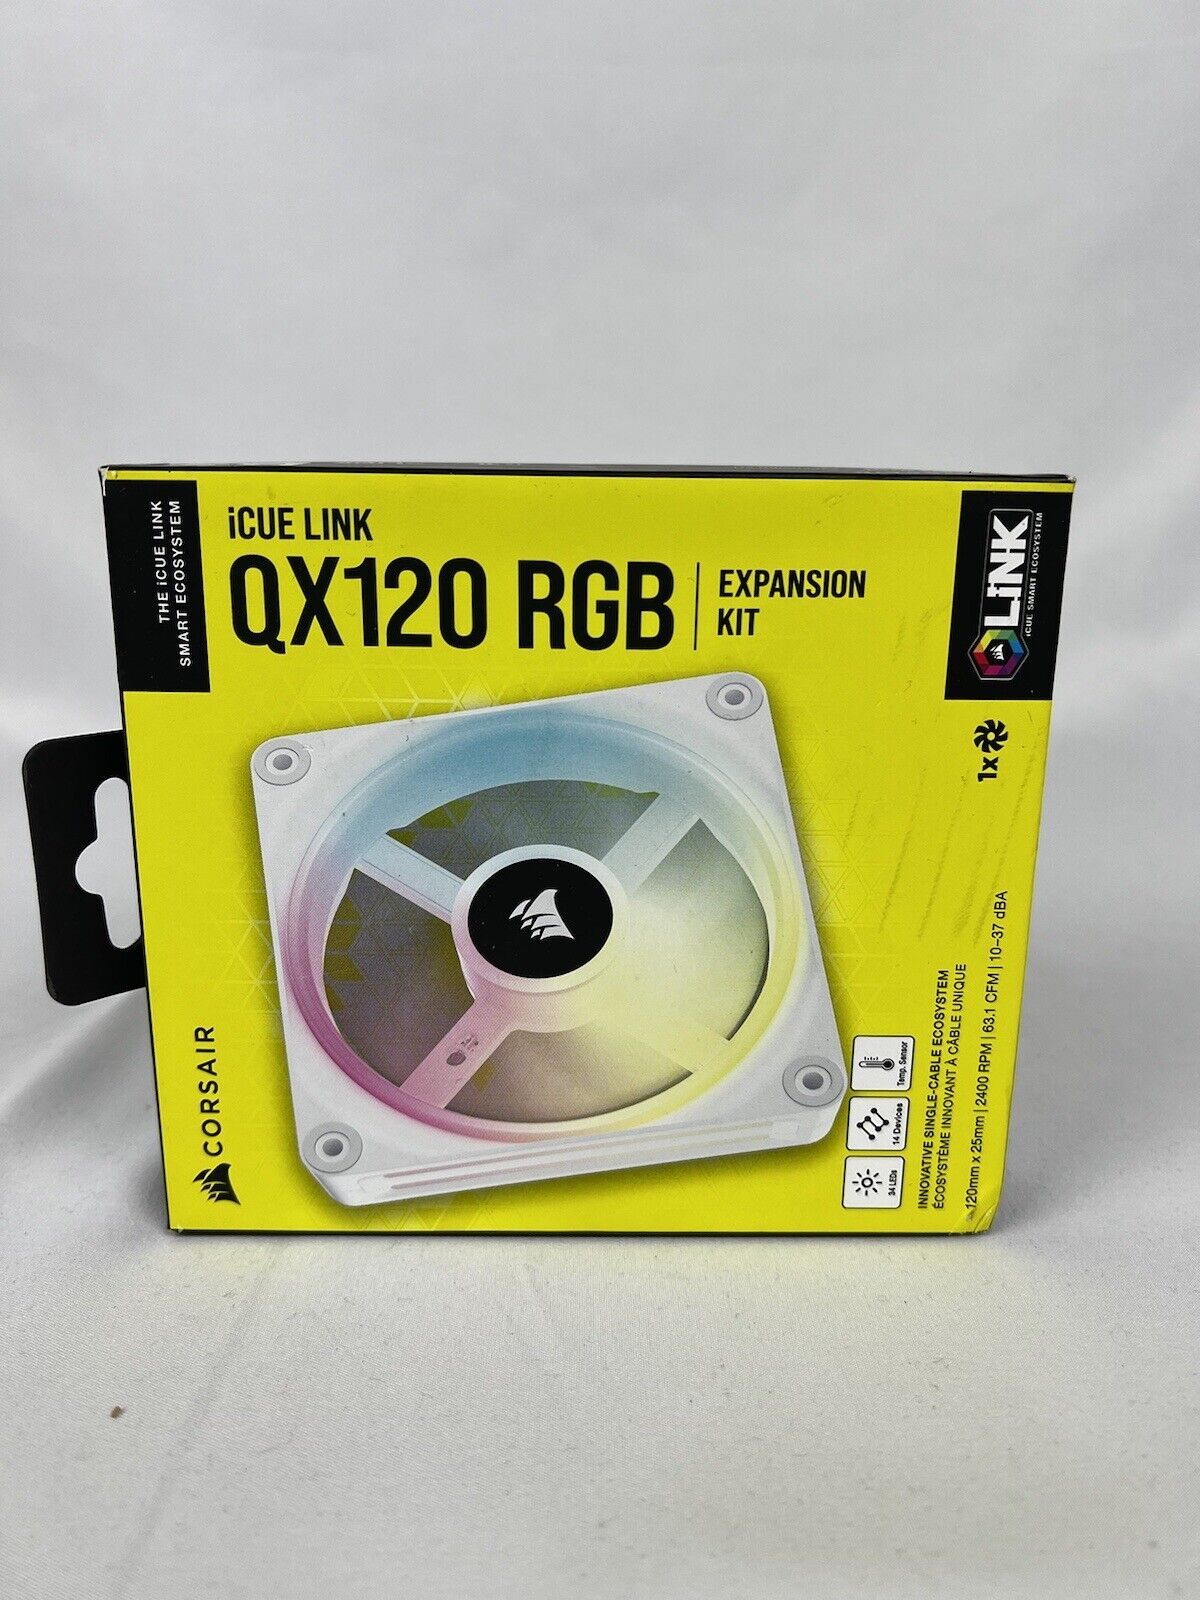 CORSAIR iCUE LINK QX120 RGB Series, 120mm Magnetic Dome Fan Expansion Kit